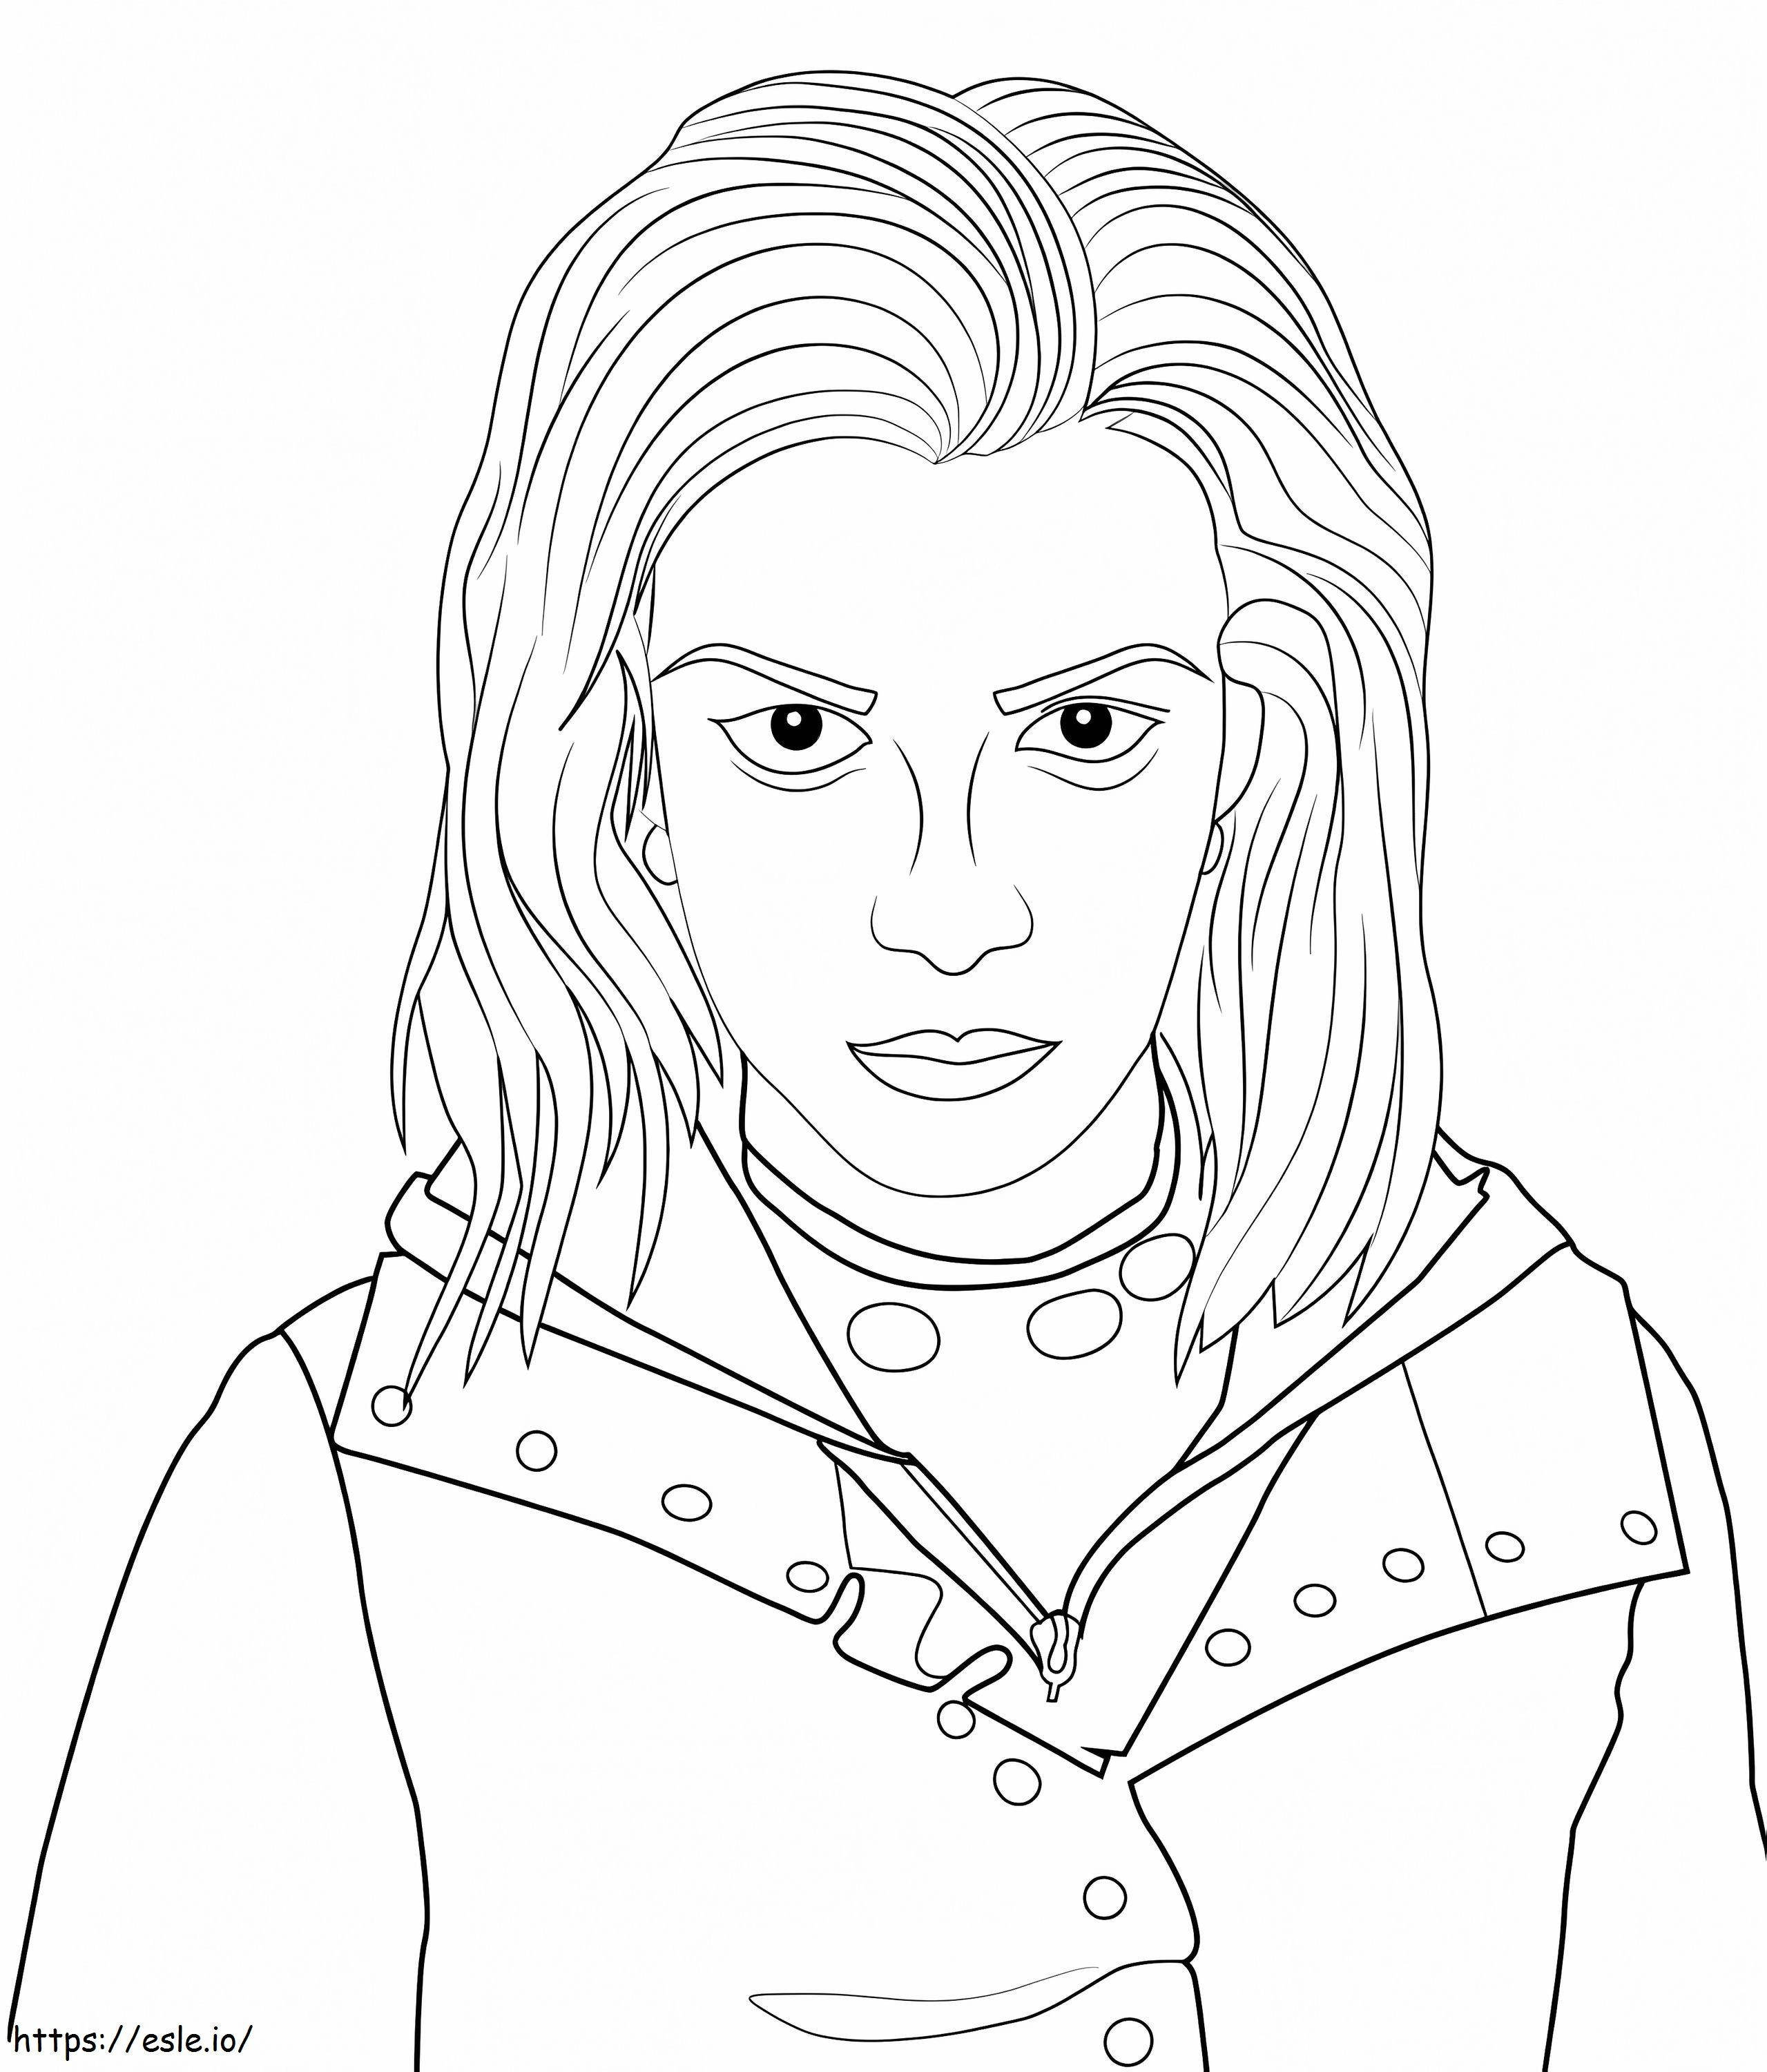 Nymphadora Tonks From Harry Potter coloring page